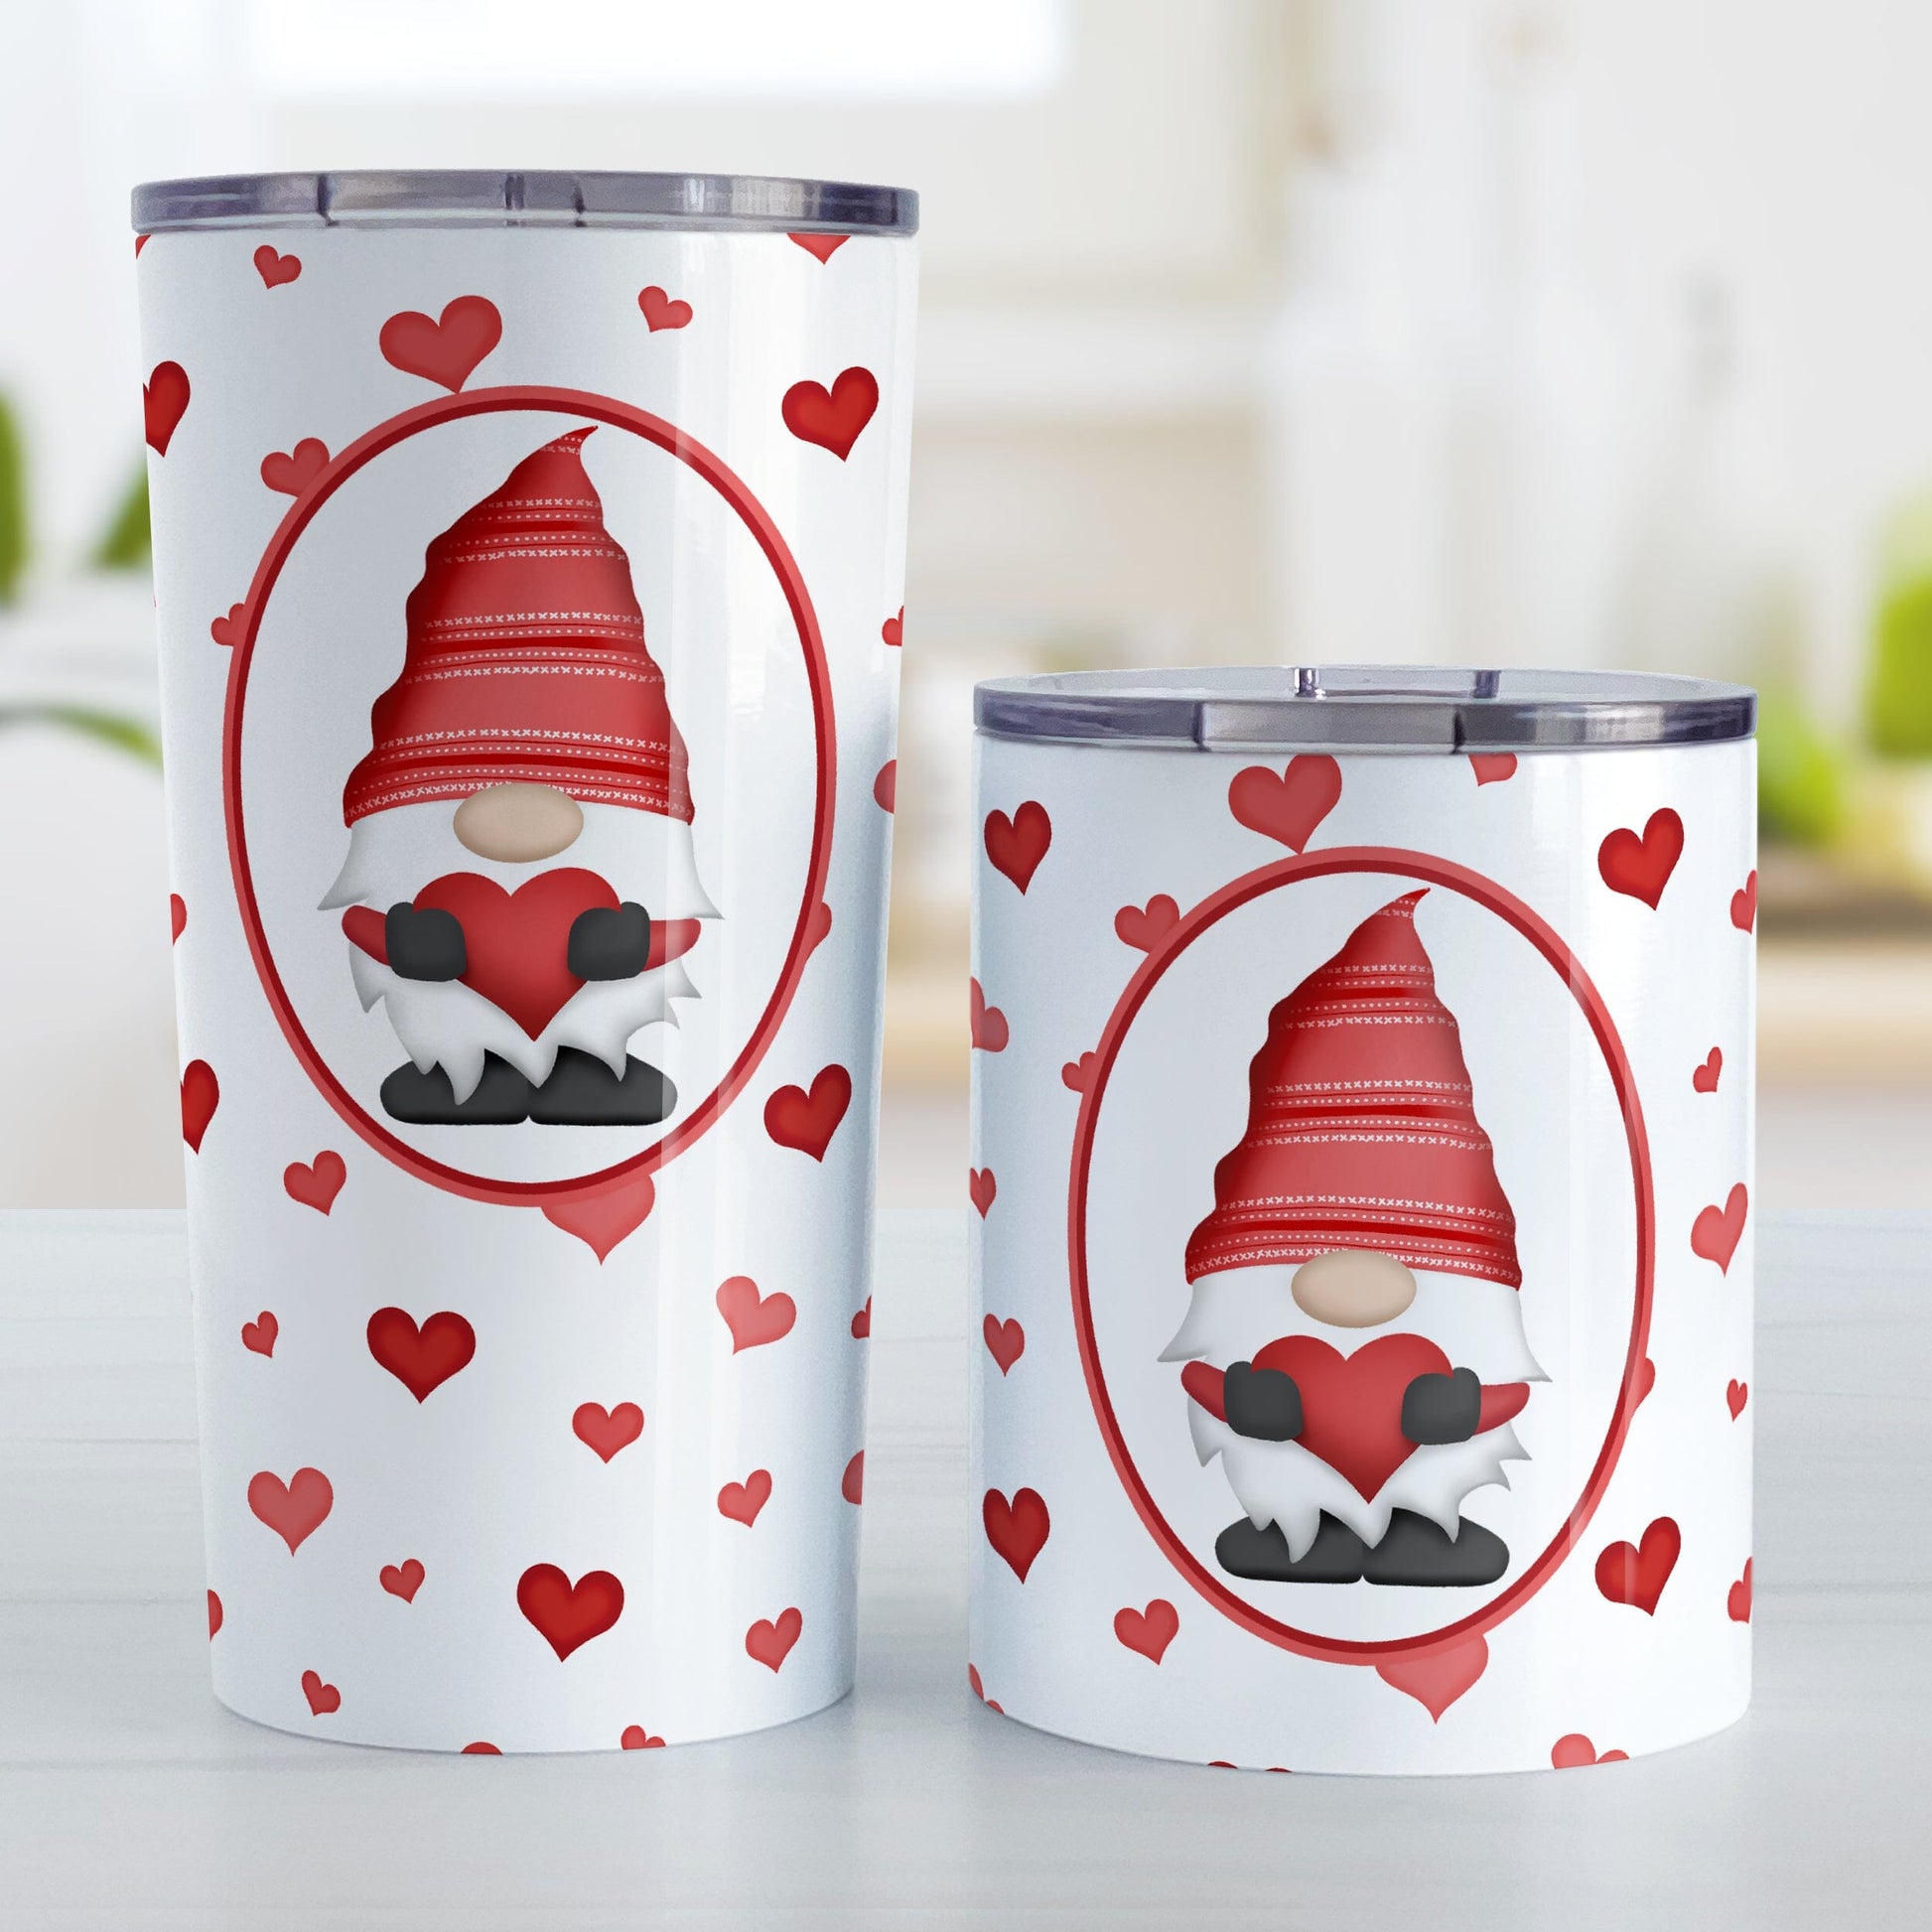 Red Gnome Dainty Hearts Tumbler Cup (20oz or 10oz) at Amy's Coffee Mugs. Stainless steel tumbler cups designed with an adorable red gnome holding a heart in a white oval over a pattern of cute and dainty hearts in different shades of red that wrap around the cups. Photo shows both sized cups on a table next to each other. 